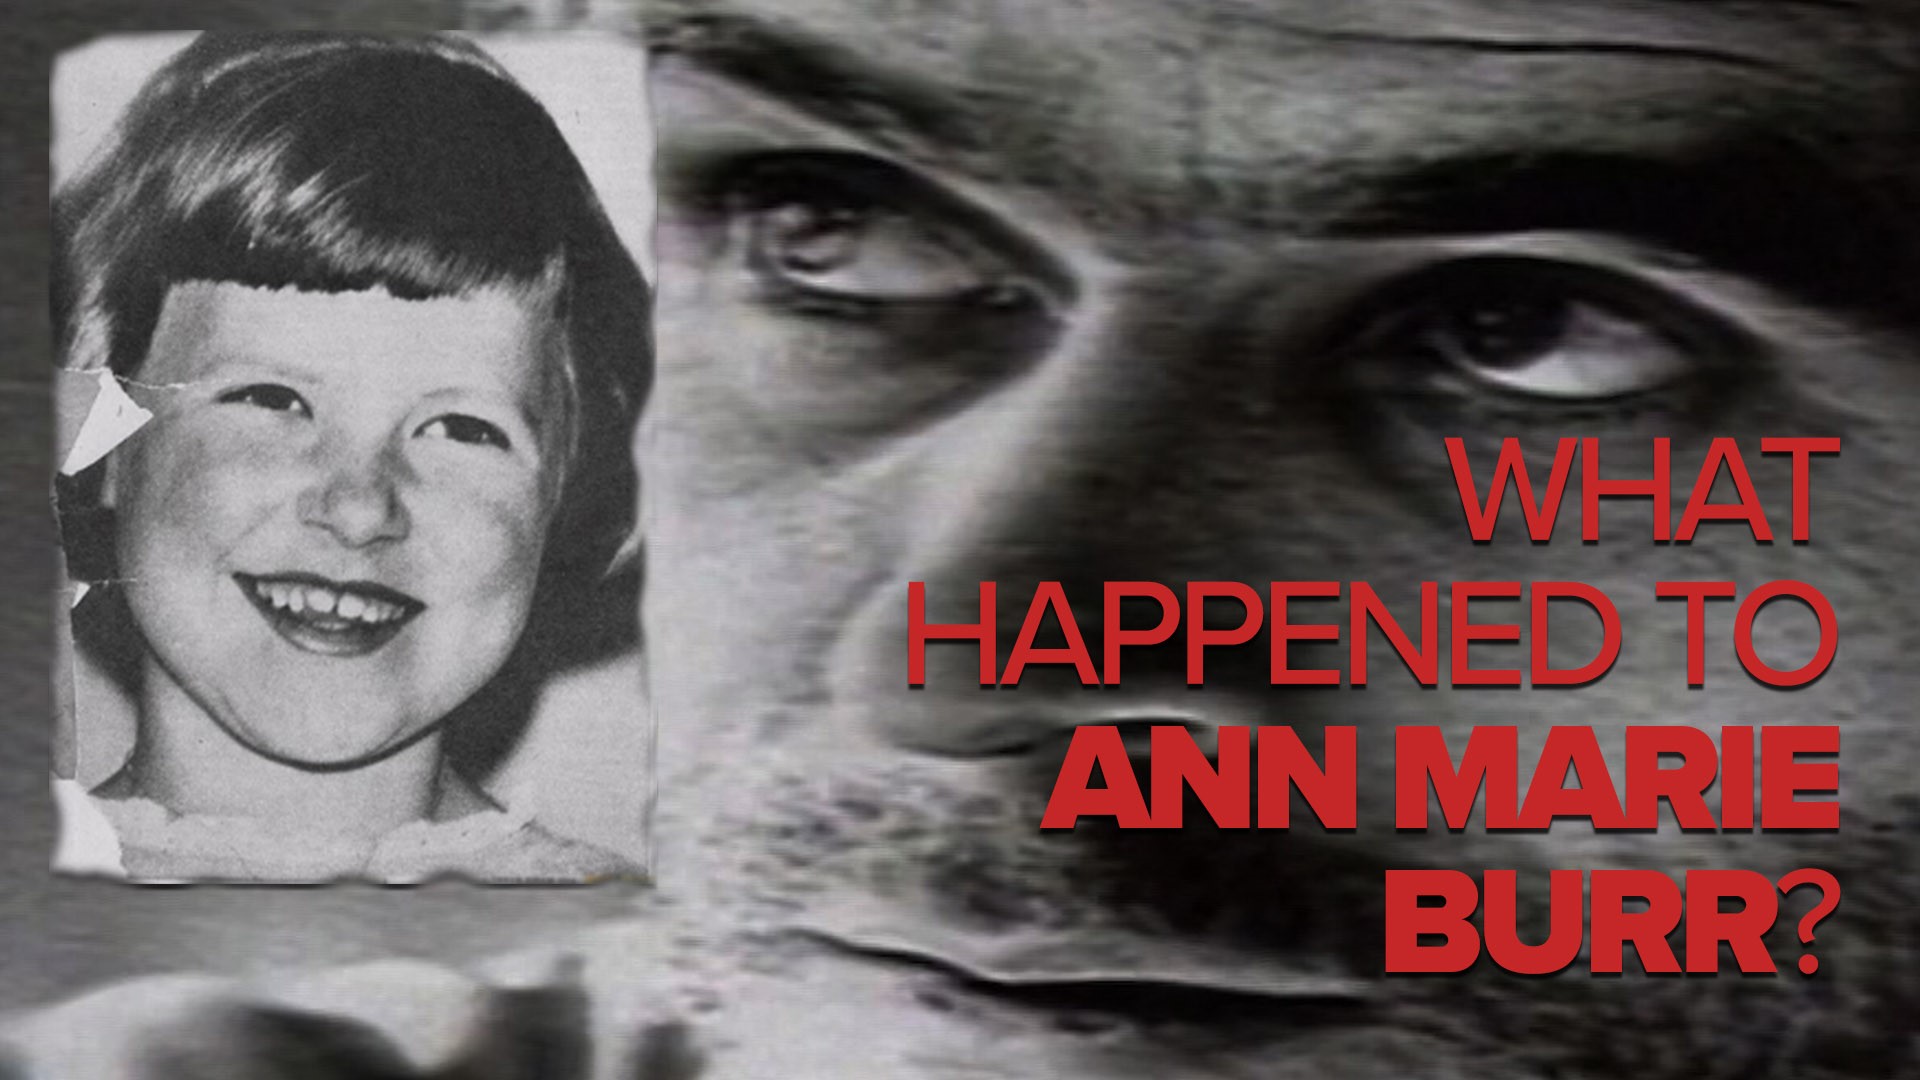 What happened to Ann Marie Burr? The 8-year-old neighbor of Ted Bundy disappeared in 1961. While on death row, he seemingly confessed to killing her when he was 14.